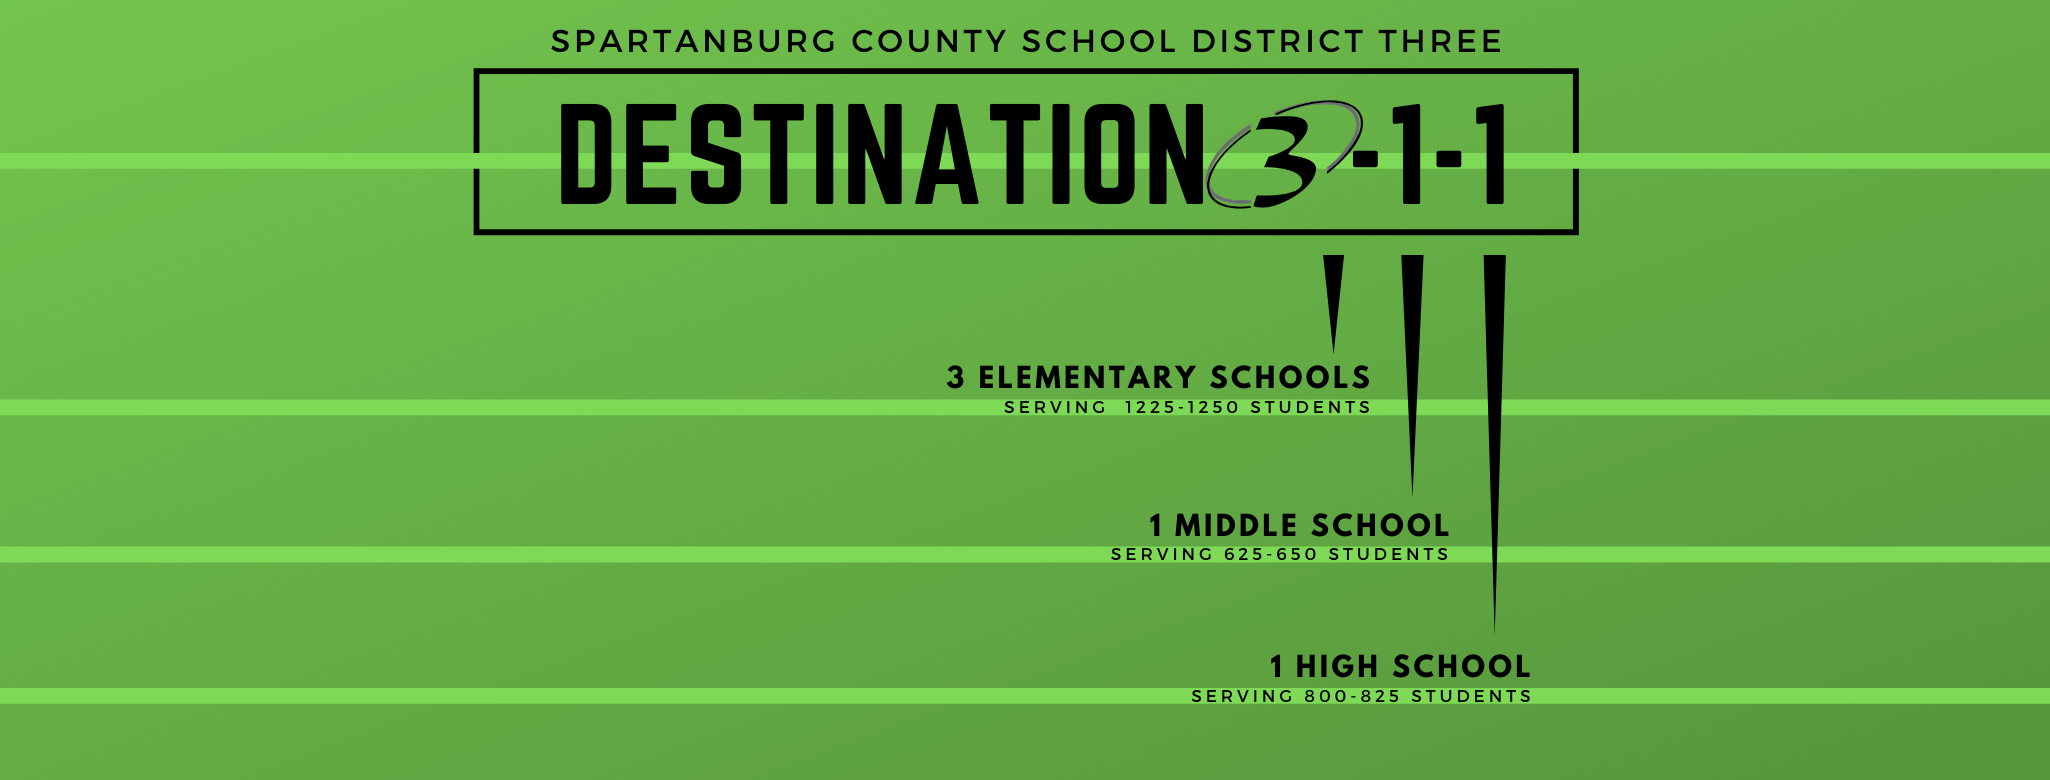 Destination 311, 3 elementary schools serving 1250 students, 1 middle school serving 650 students, 1 high school serving 825 students. Black text on bright green background